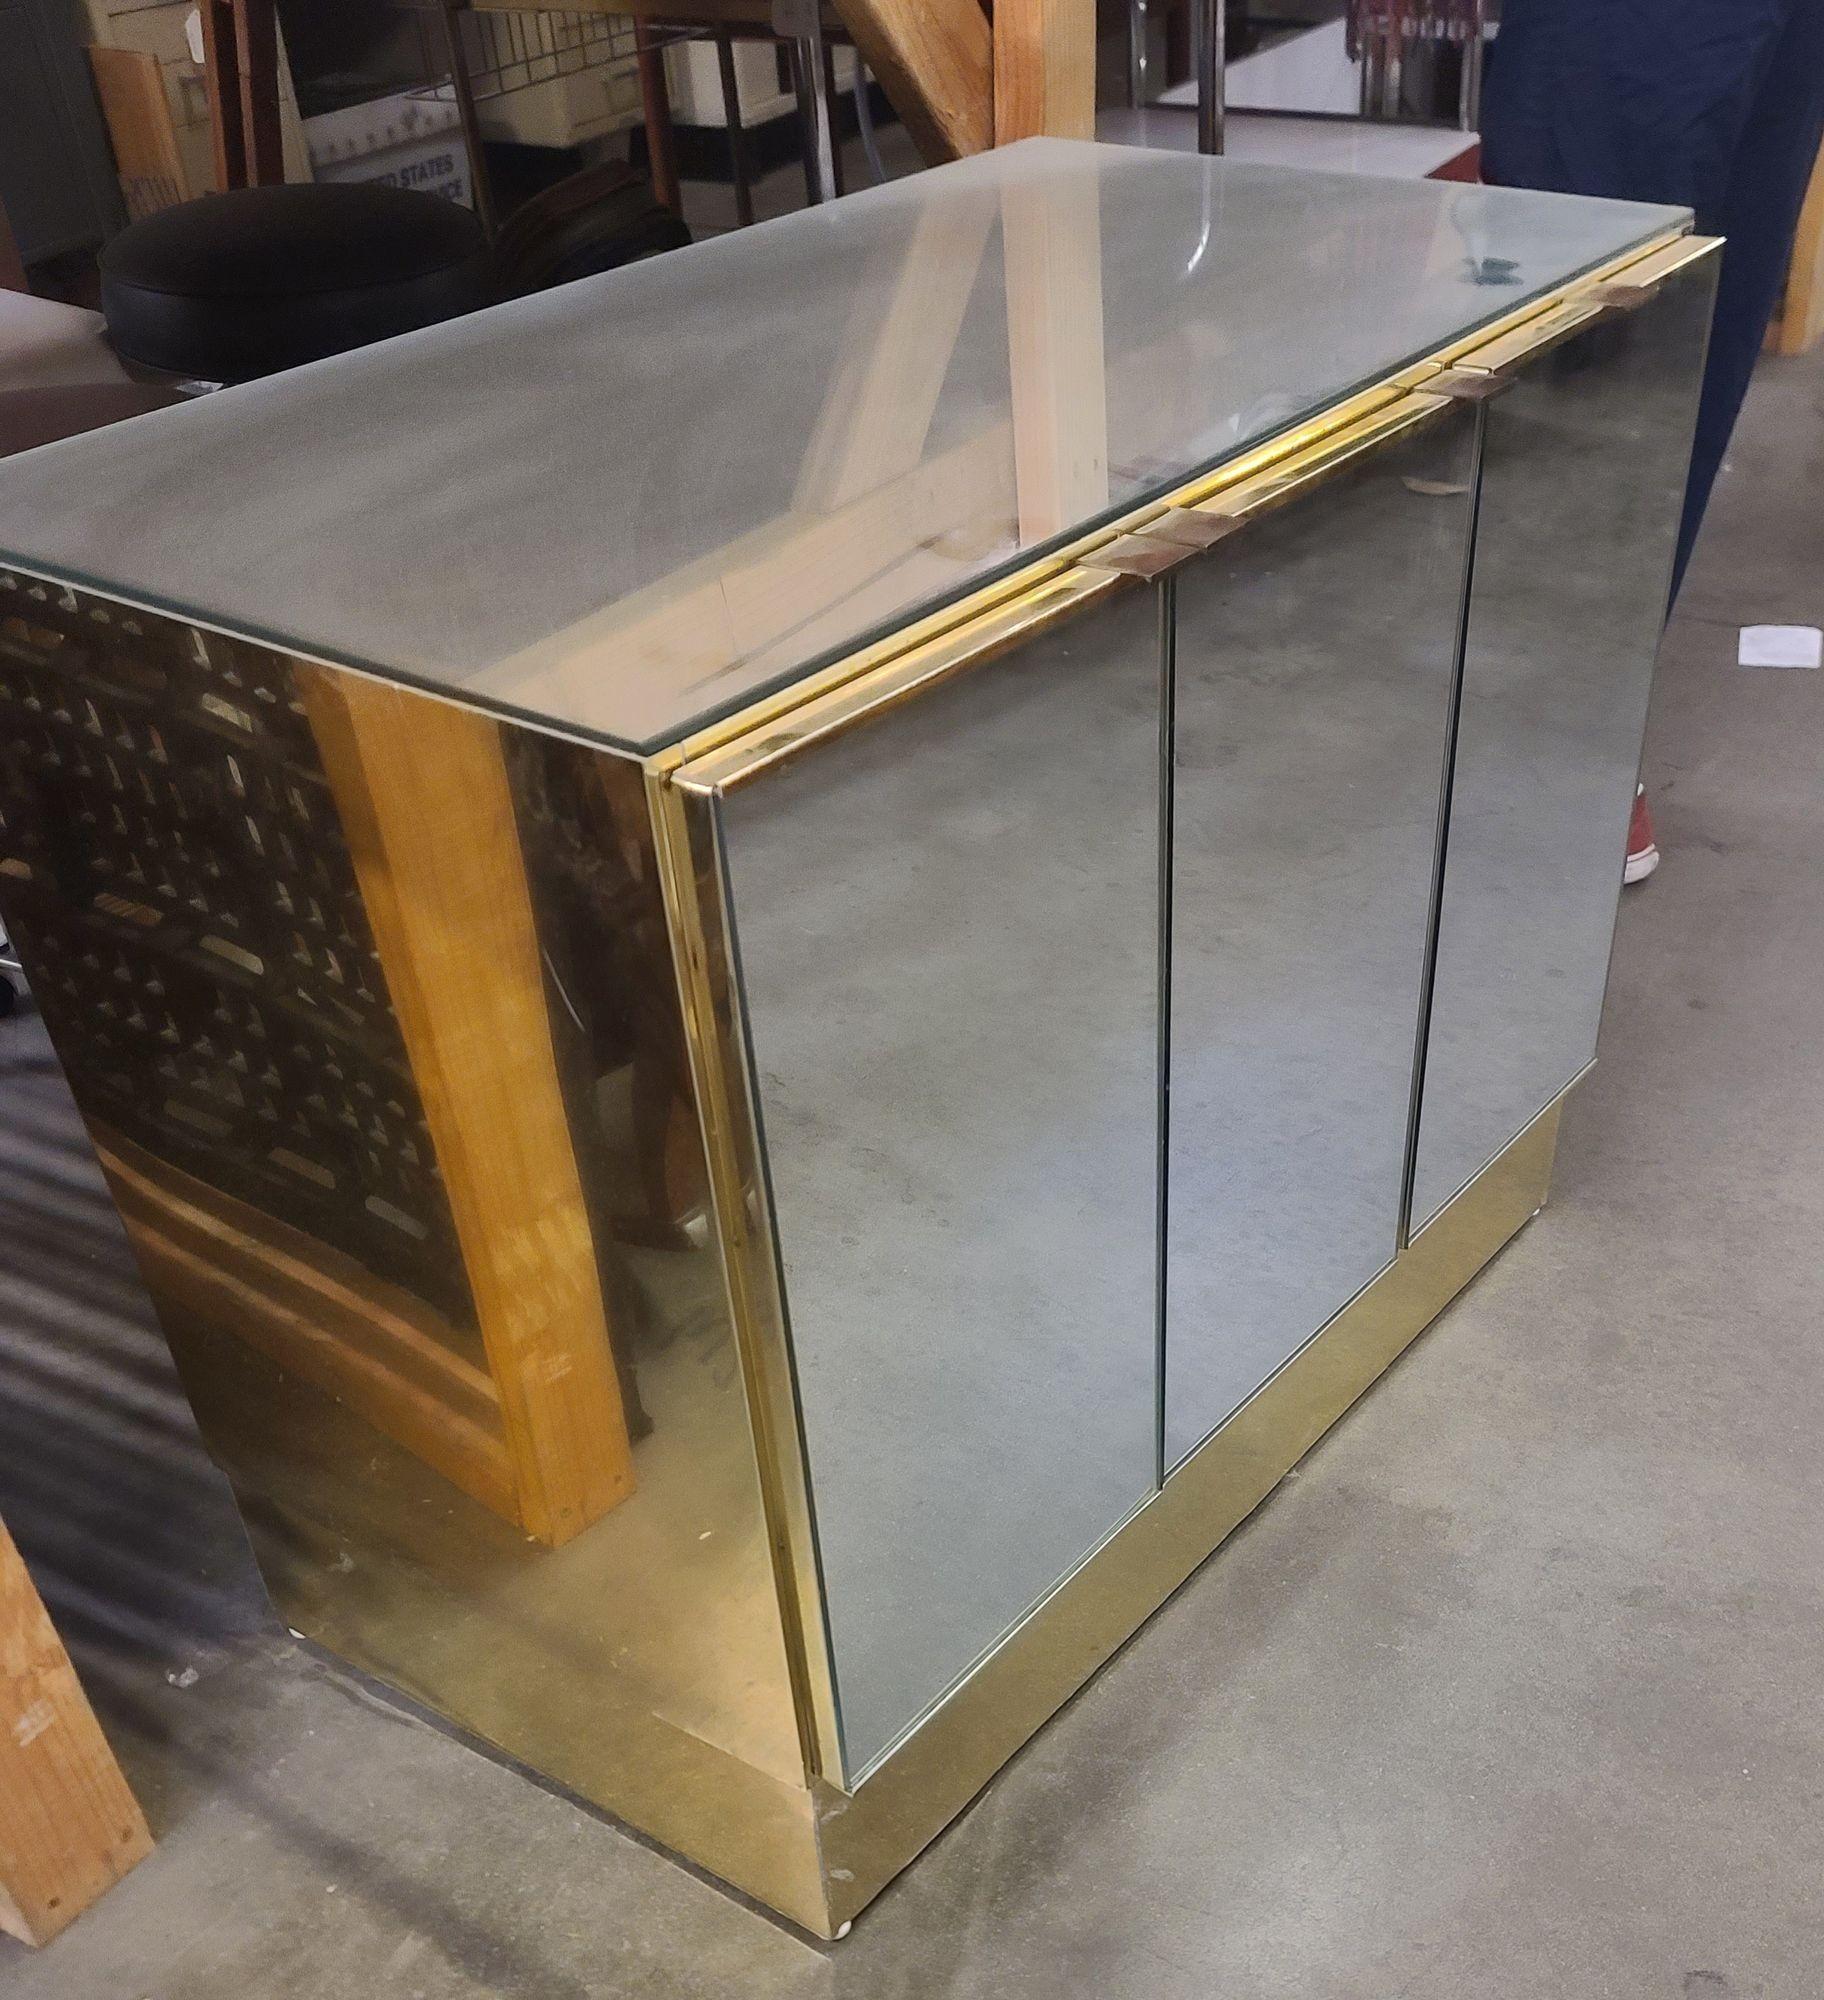 A 1970's postmodern bronze and polished metal mirror cabinet by Ello featuring three-panel mirror doors and a big interior storage space. There are some dings and a small amount of pitting on the metal, but the wear of the piece (consistent with